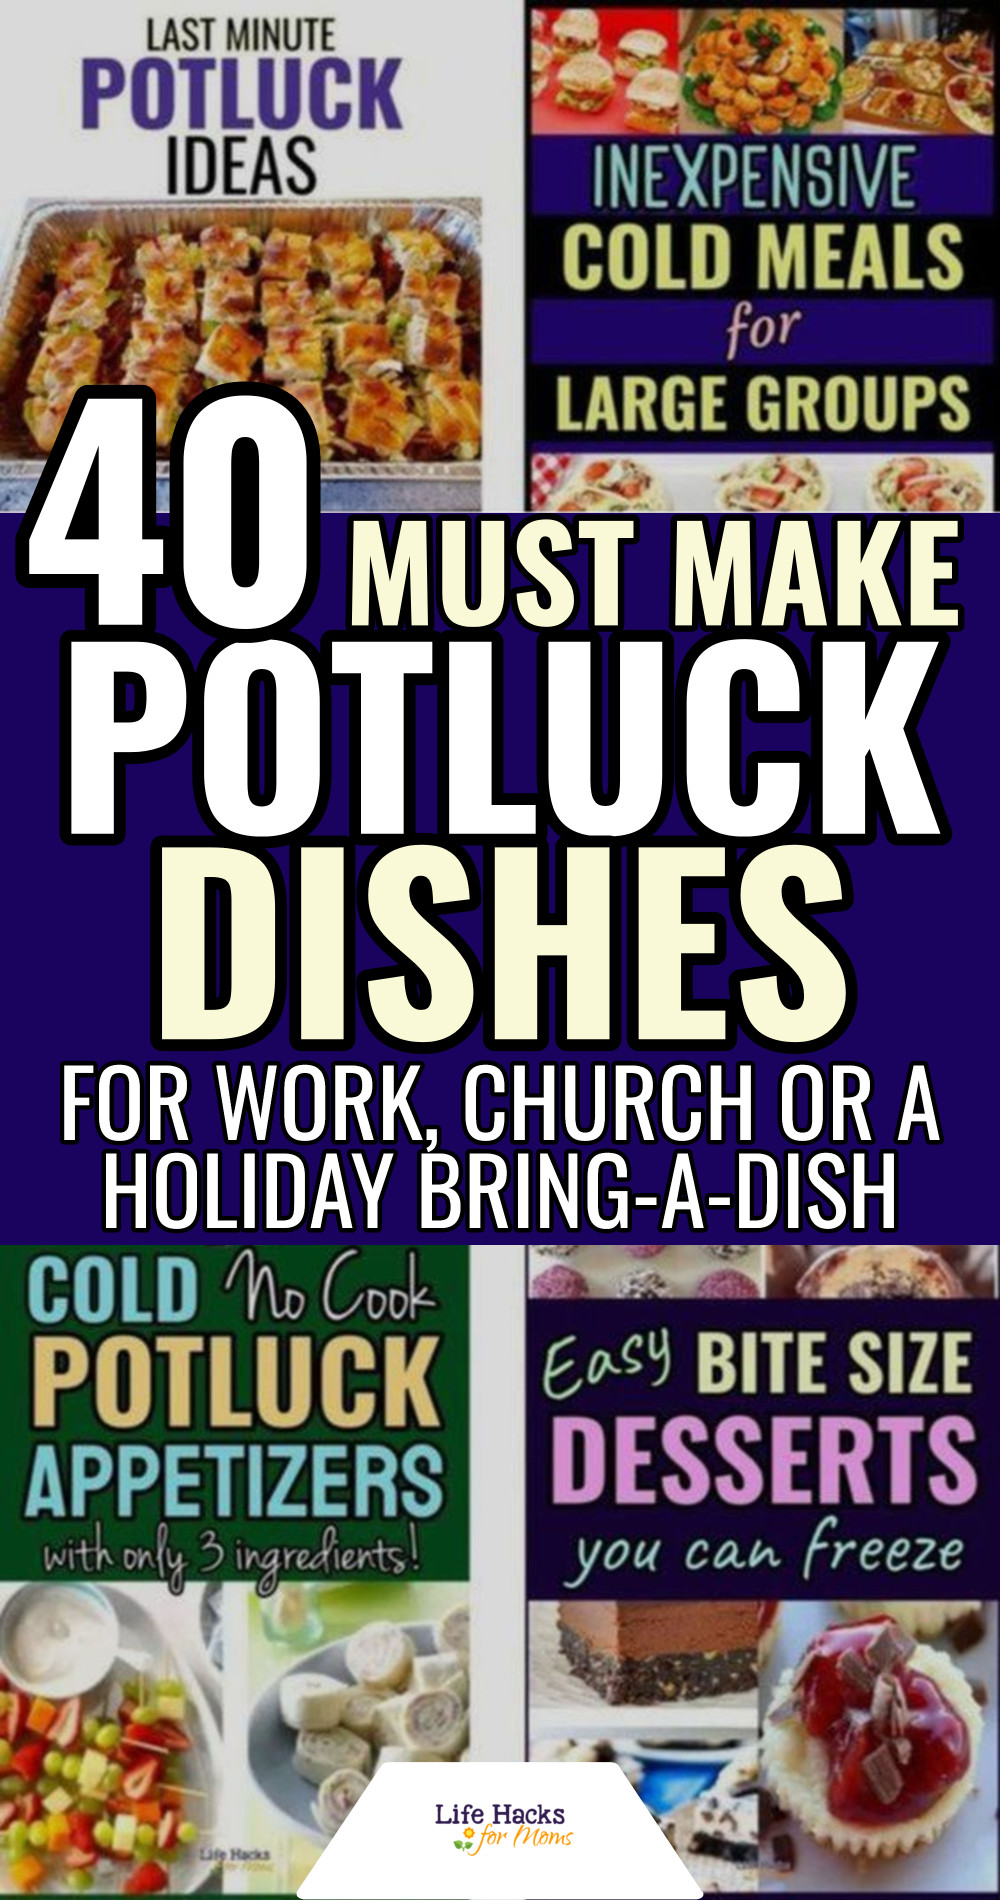 40 Must Make Potluck Dishes For Work, Church Or Holiday Bring-A-Dish Parties